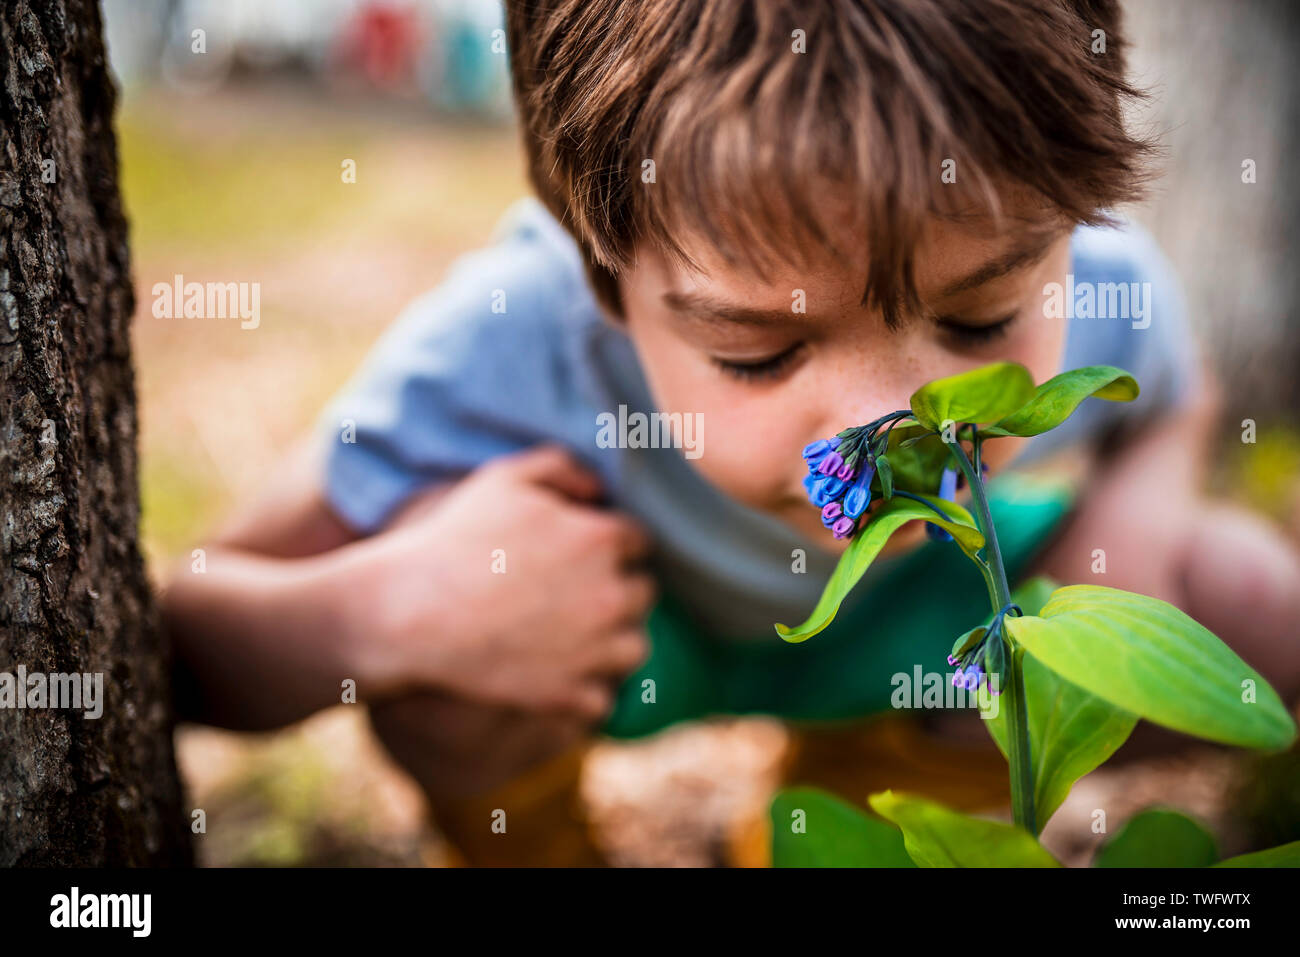 Boy crouching in the garden smelling a flower, United States Stock Photo